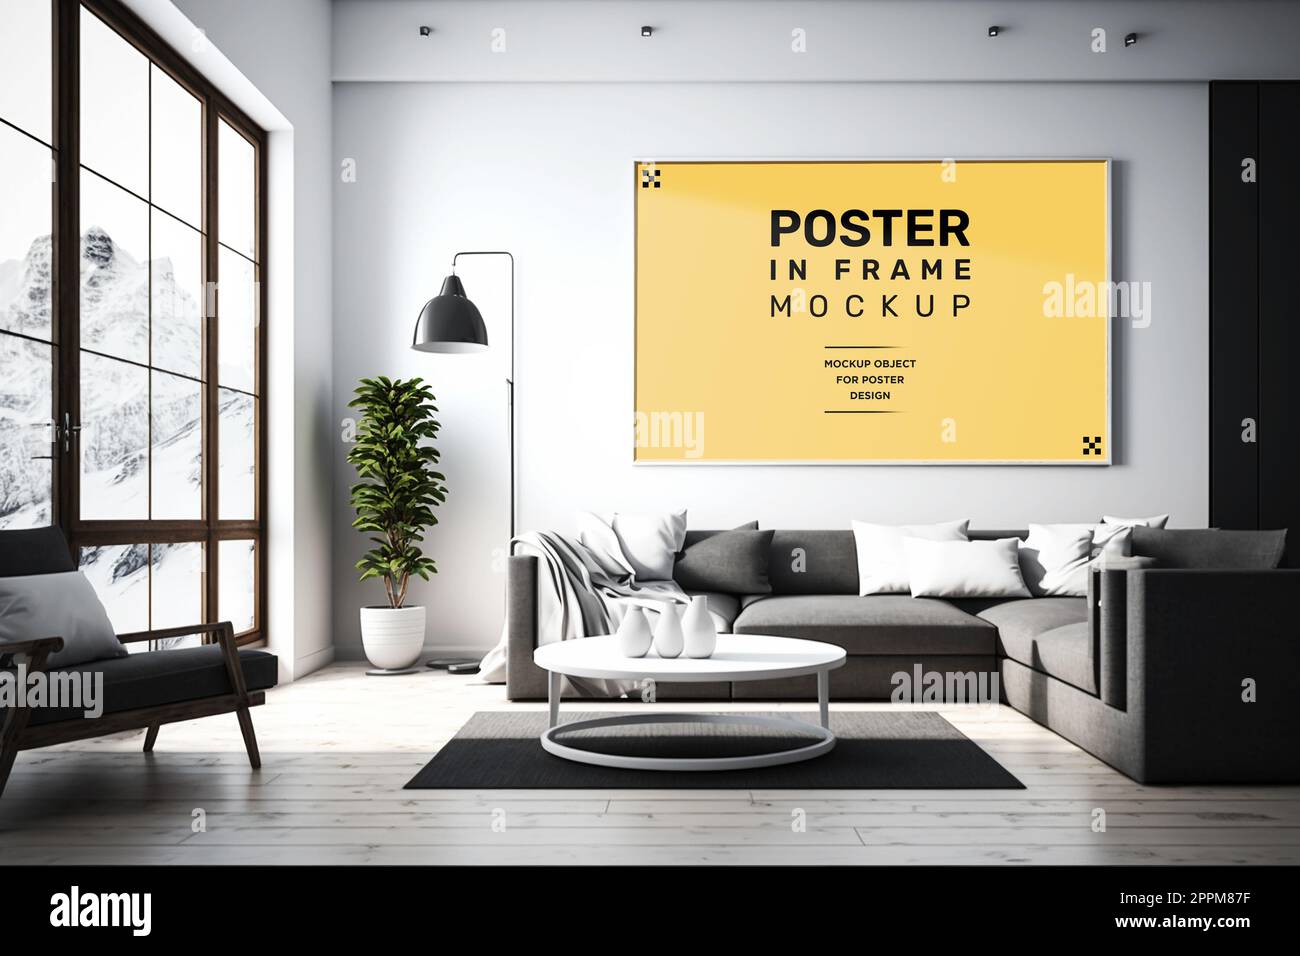 Modern room interior with mock-up photo frame on white walls. Black and white furniture. Stock Photo